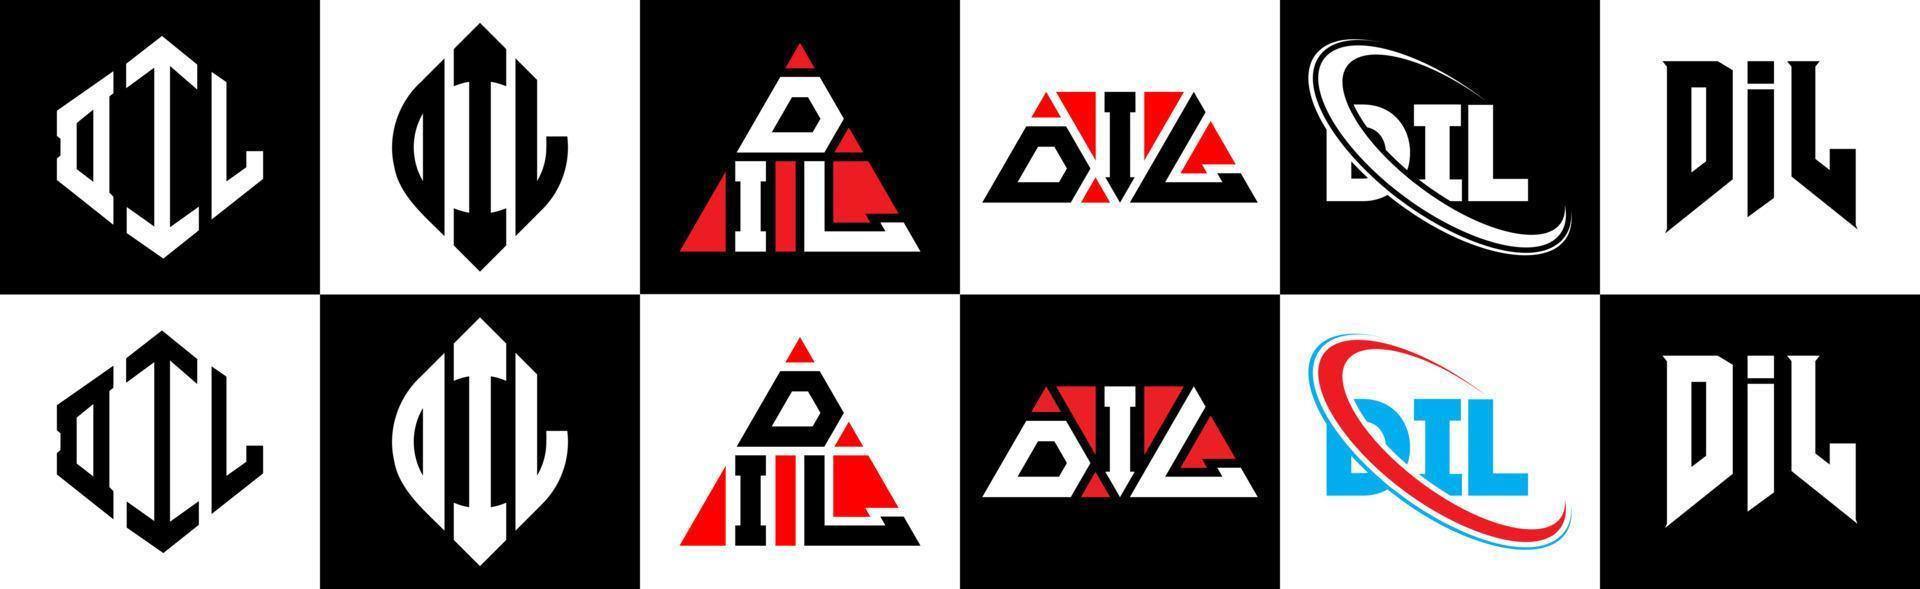 DIL letter logo design in six style. DIL polygon, circle, triangle, hexagon, flat and simple style with black and white color variation letter logo set in one artboard. DIL minimalist and classic logo vector